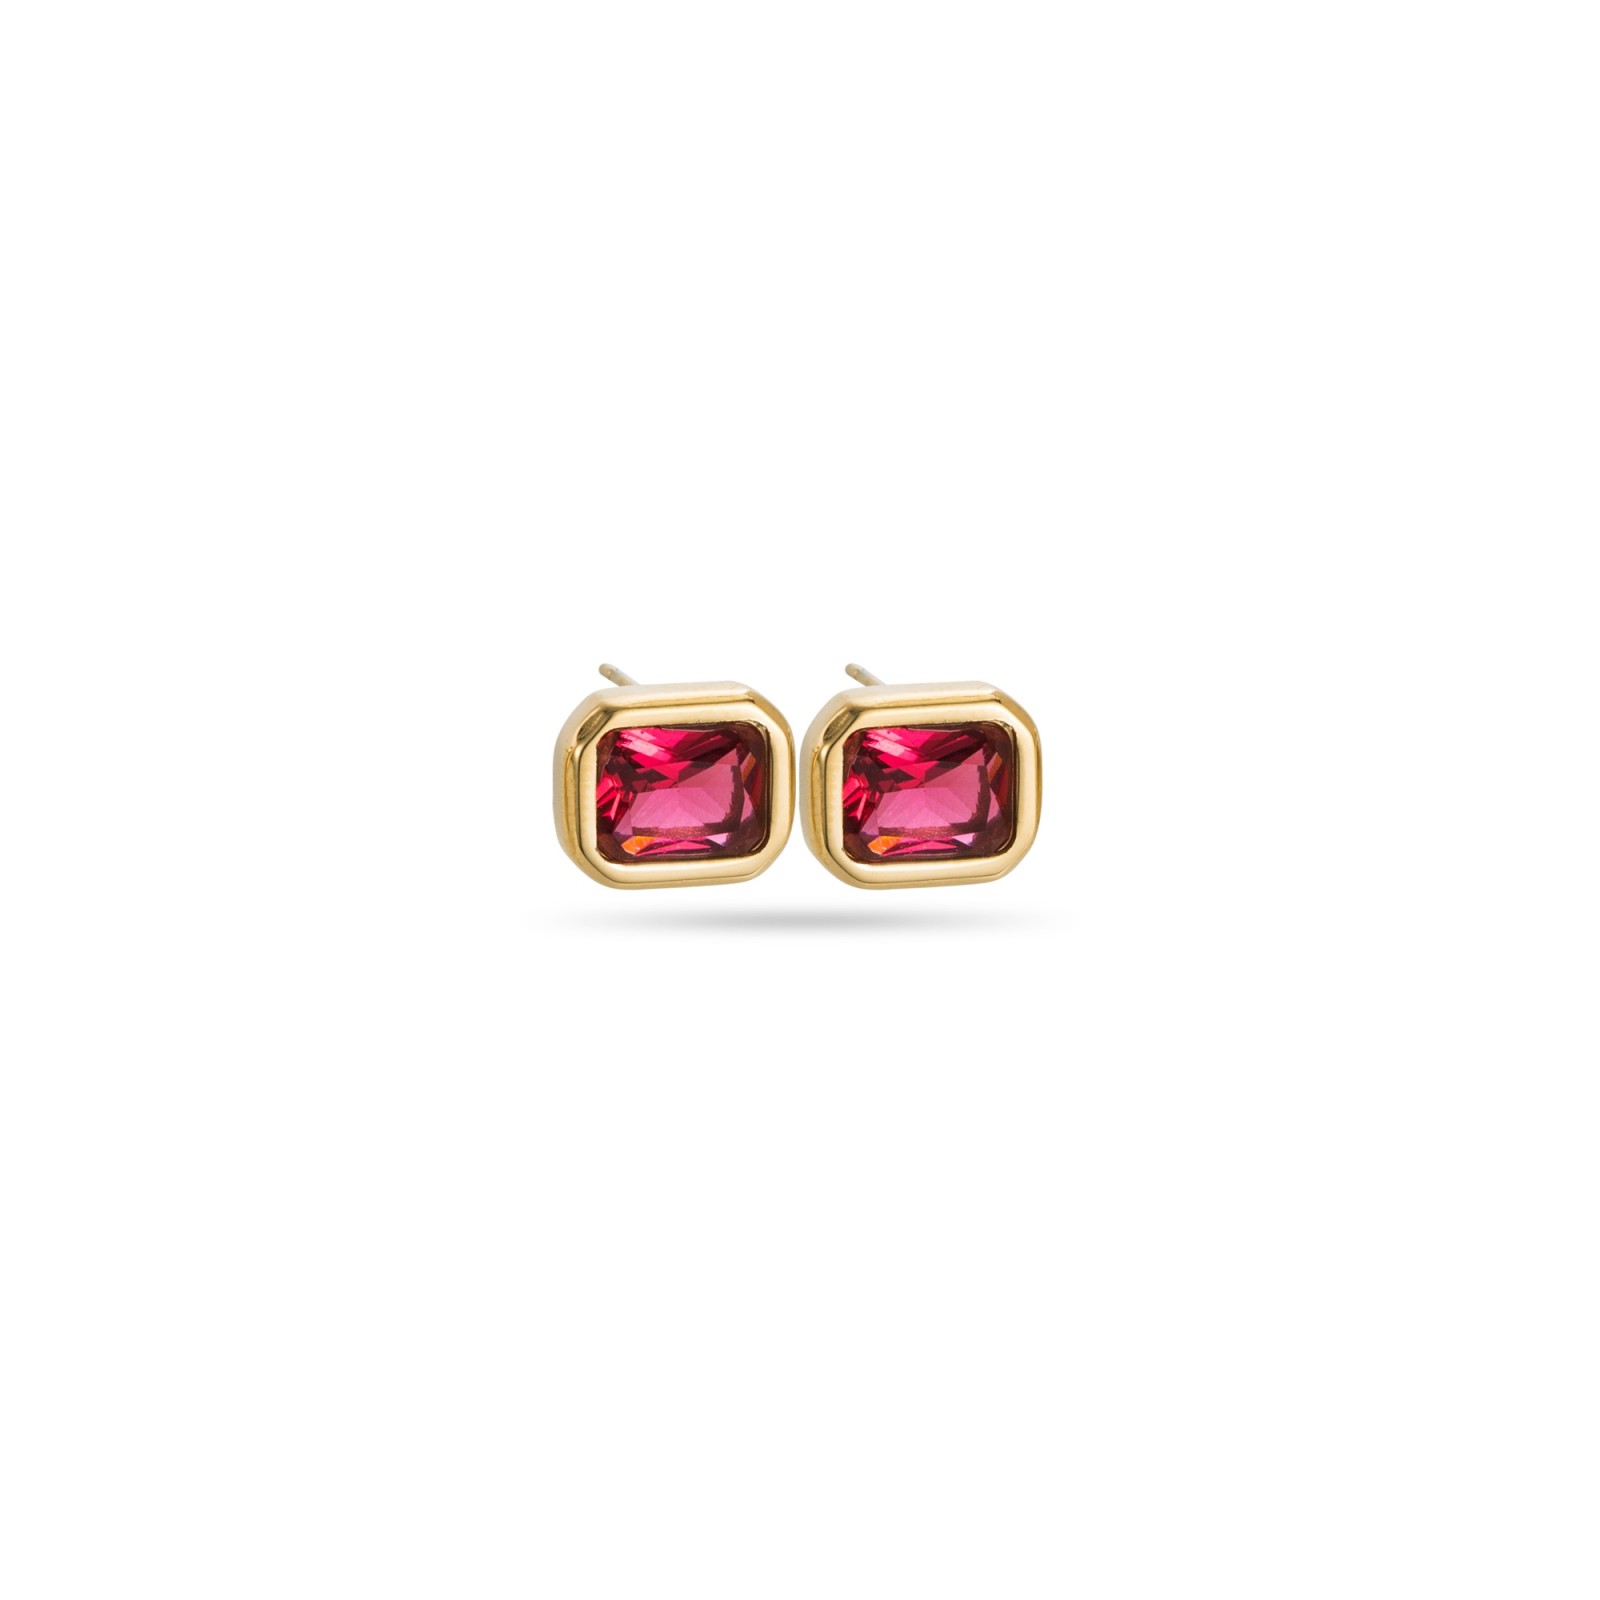 Stainless Steel Smart Earrings Color:Fuchsia Pink